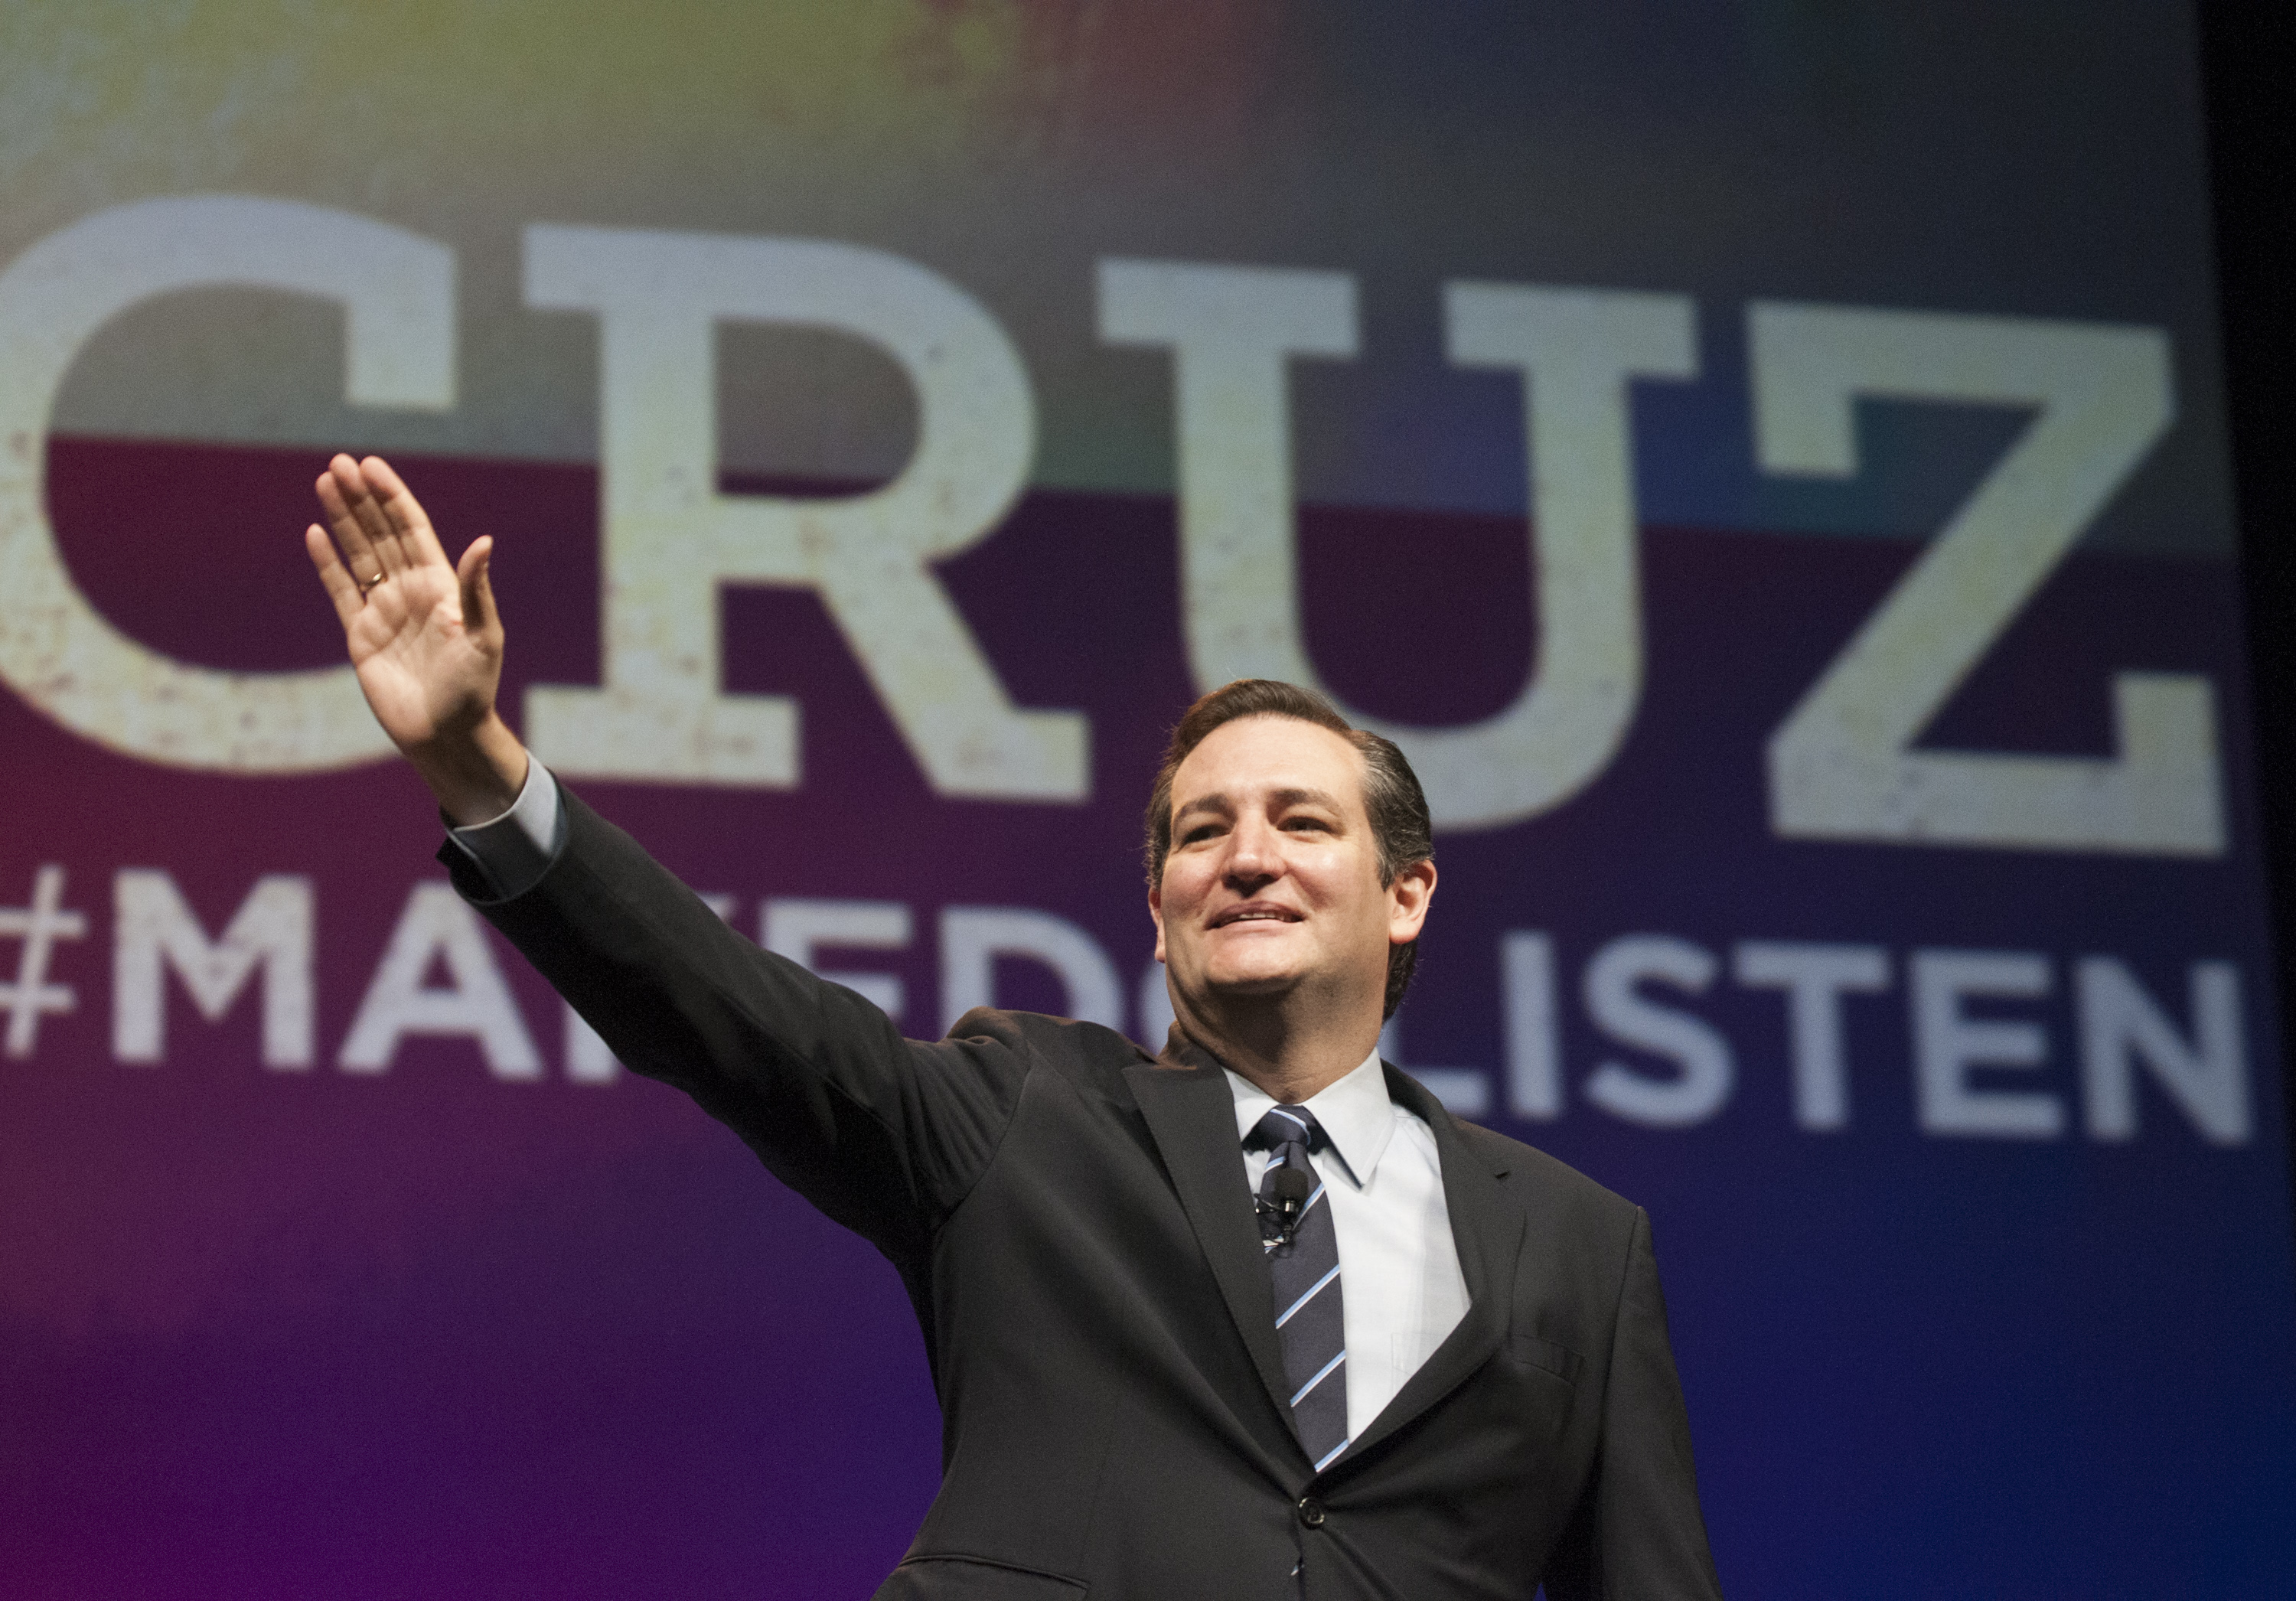 U.S. Sen. Ted Cruz promises delegates at the Texas GOP Convention in Fort Worth, Texas on June 6, 2014 to lead a conservative revolution unseen since the days of Ronald Reagan. (Rex C. Curry—AP)